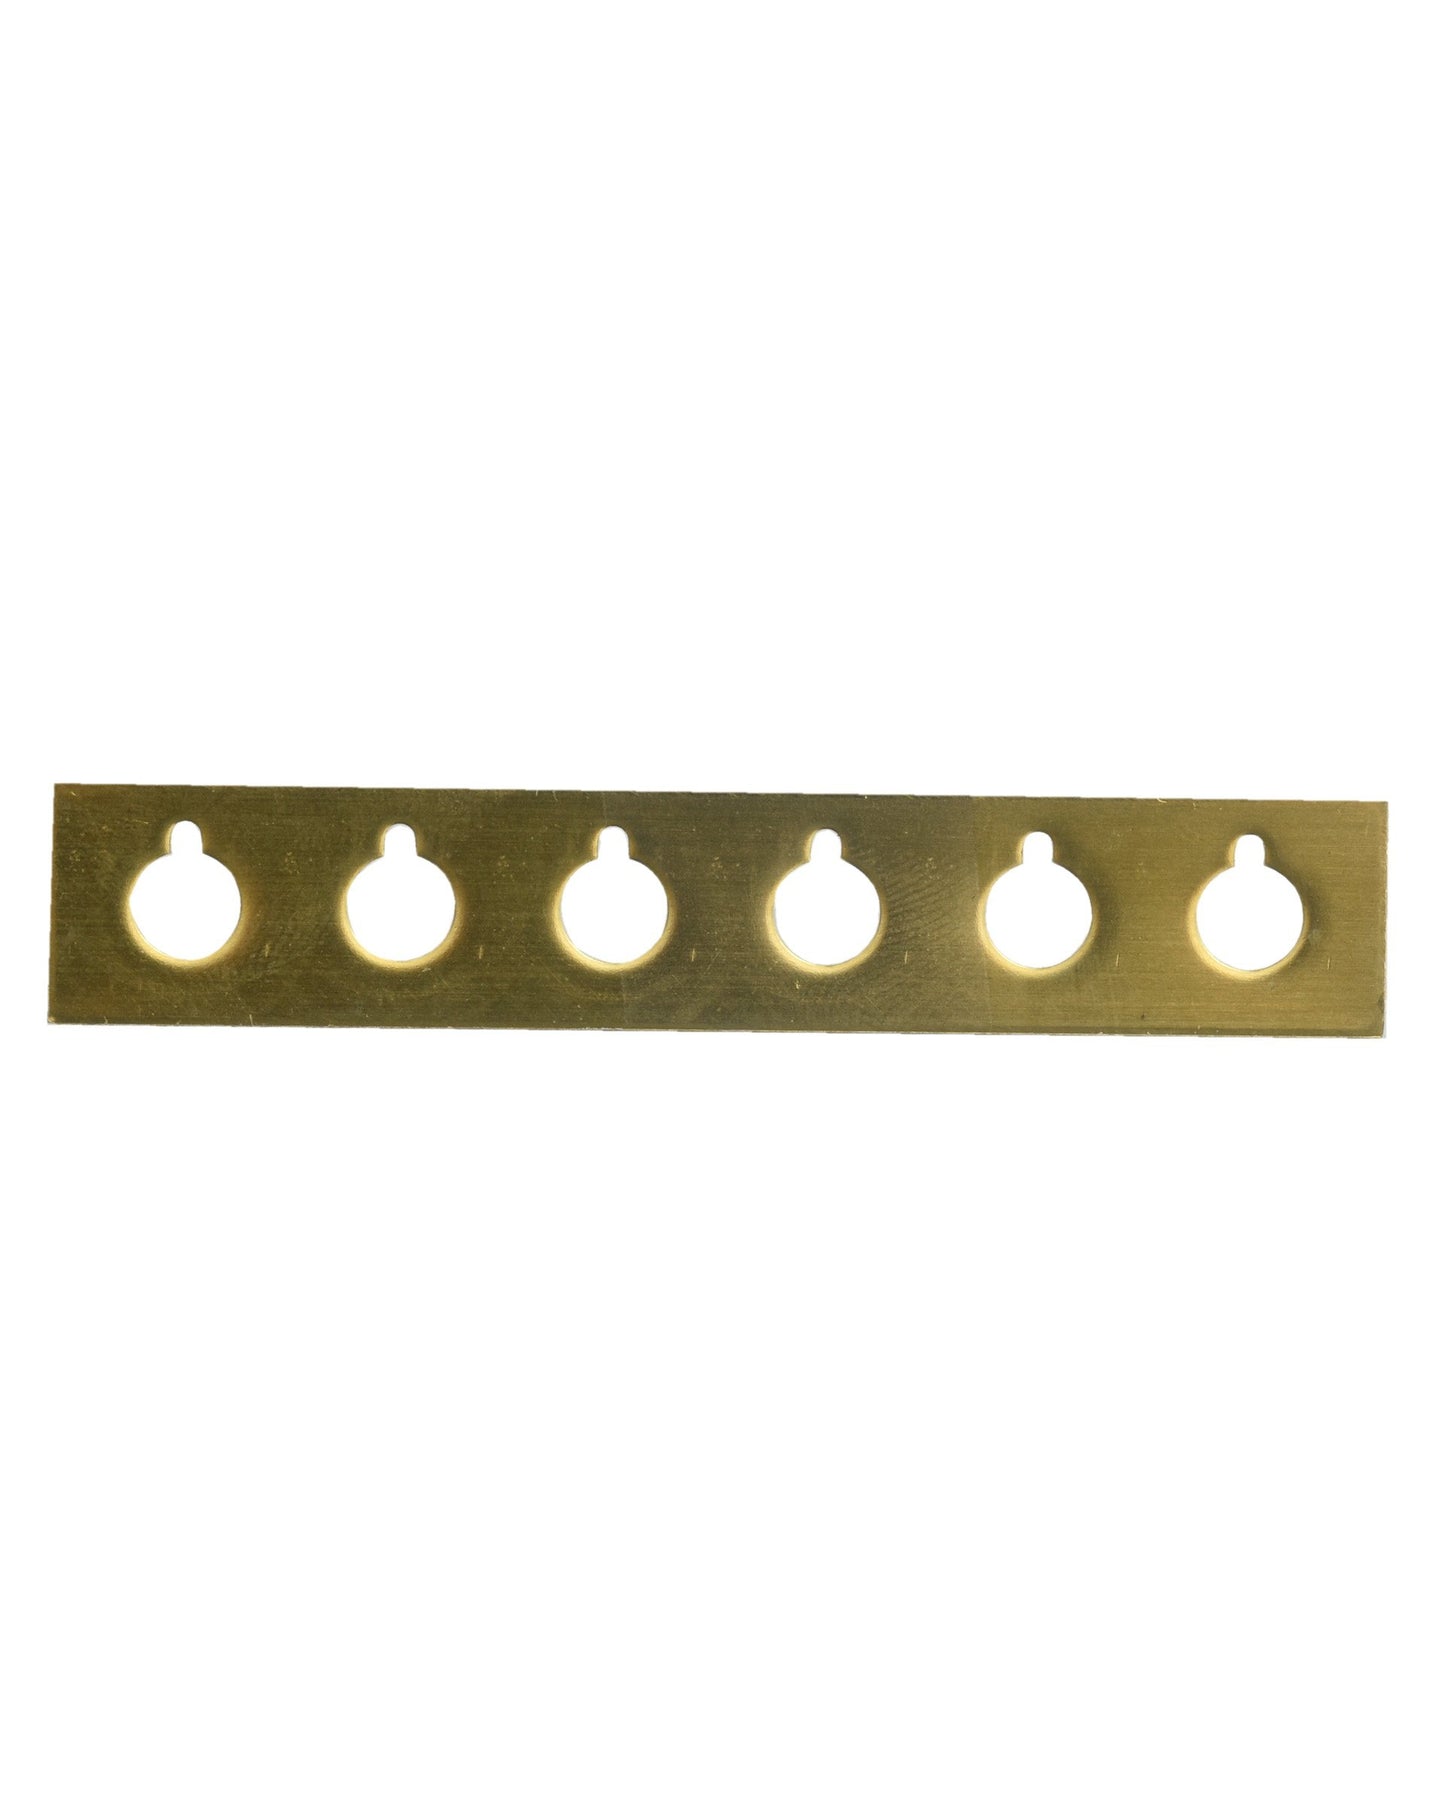 Image 1 of Mitchel's Acoustic Guitar "Plate Mate" 2 3/16" Spacing - SKU# PM100-2-3/16 : Product Type Accessories & Parts : Elderly Instruments